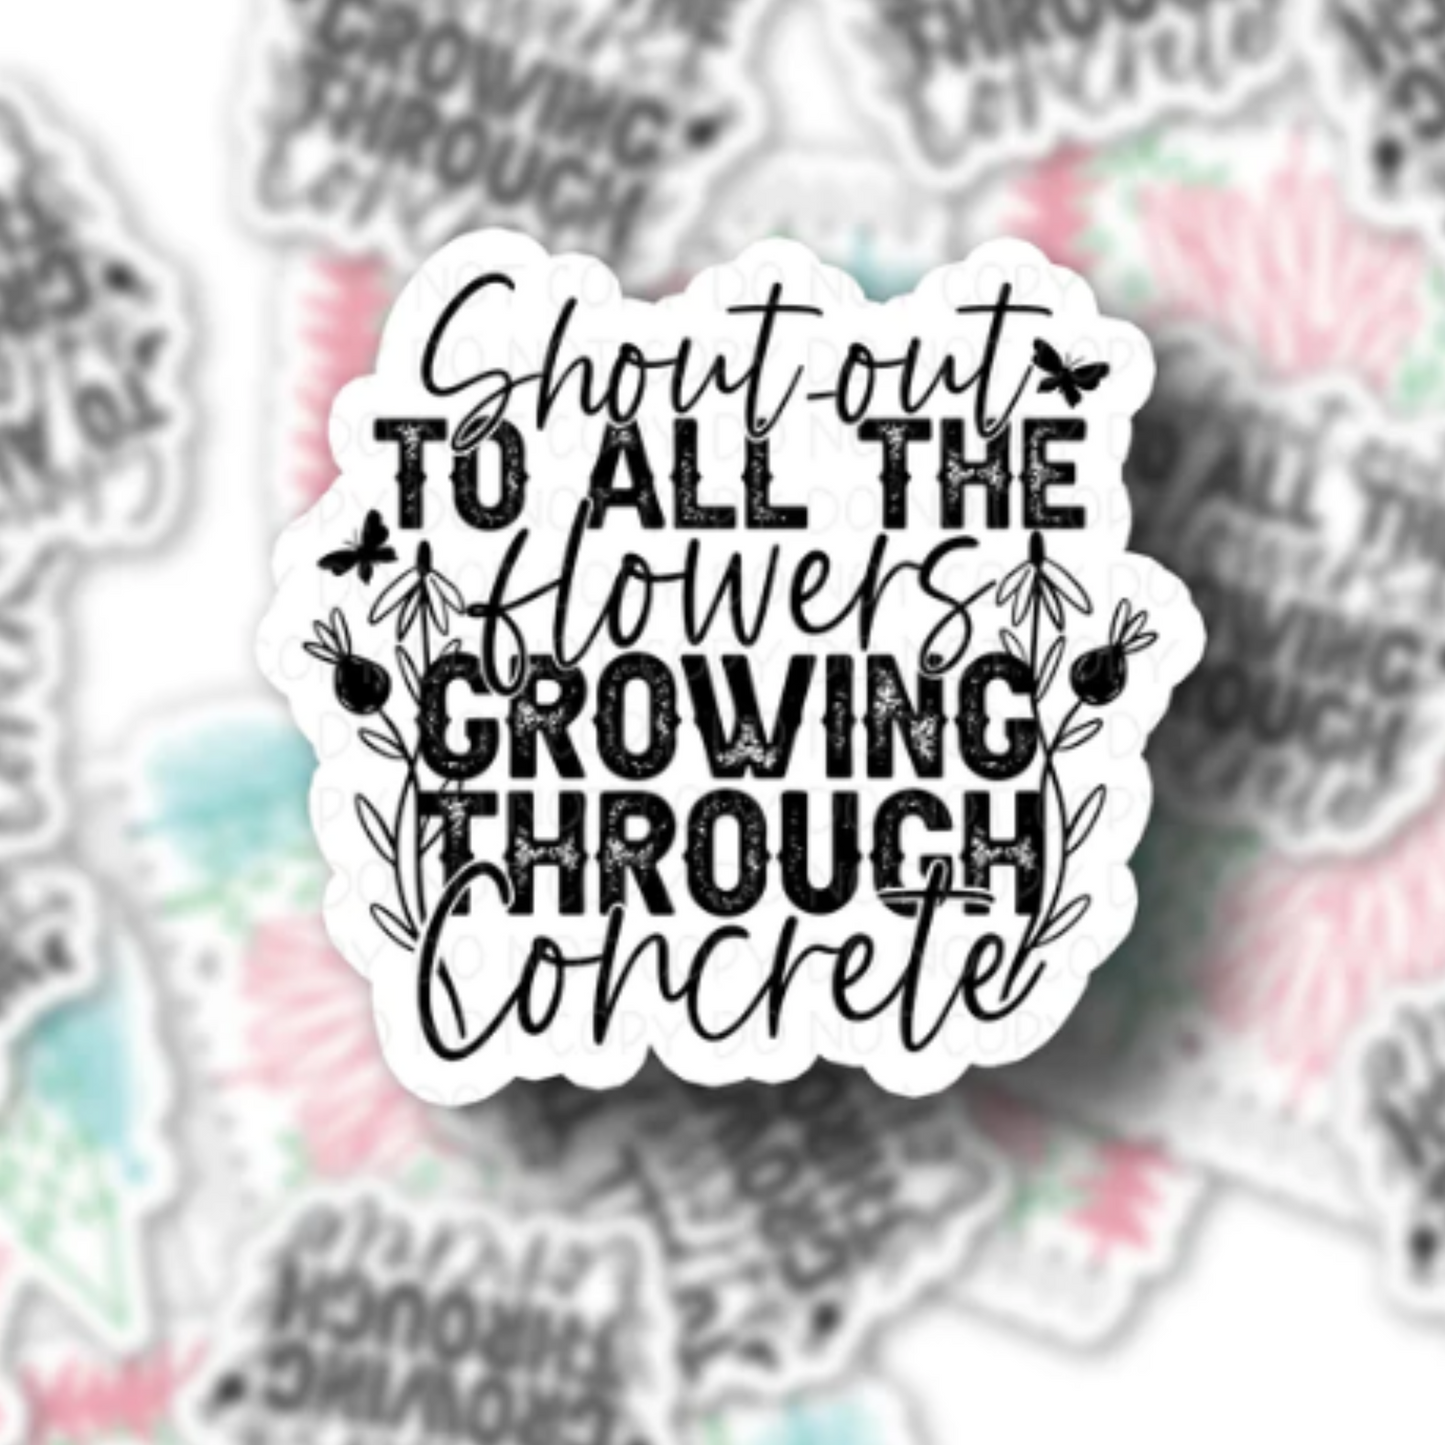 2" Vinyl Sticker - Shout out to all the flowers - Pitty Intense Vinyl